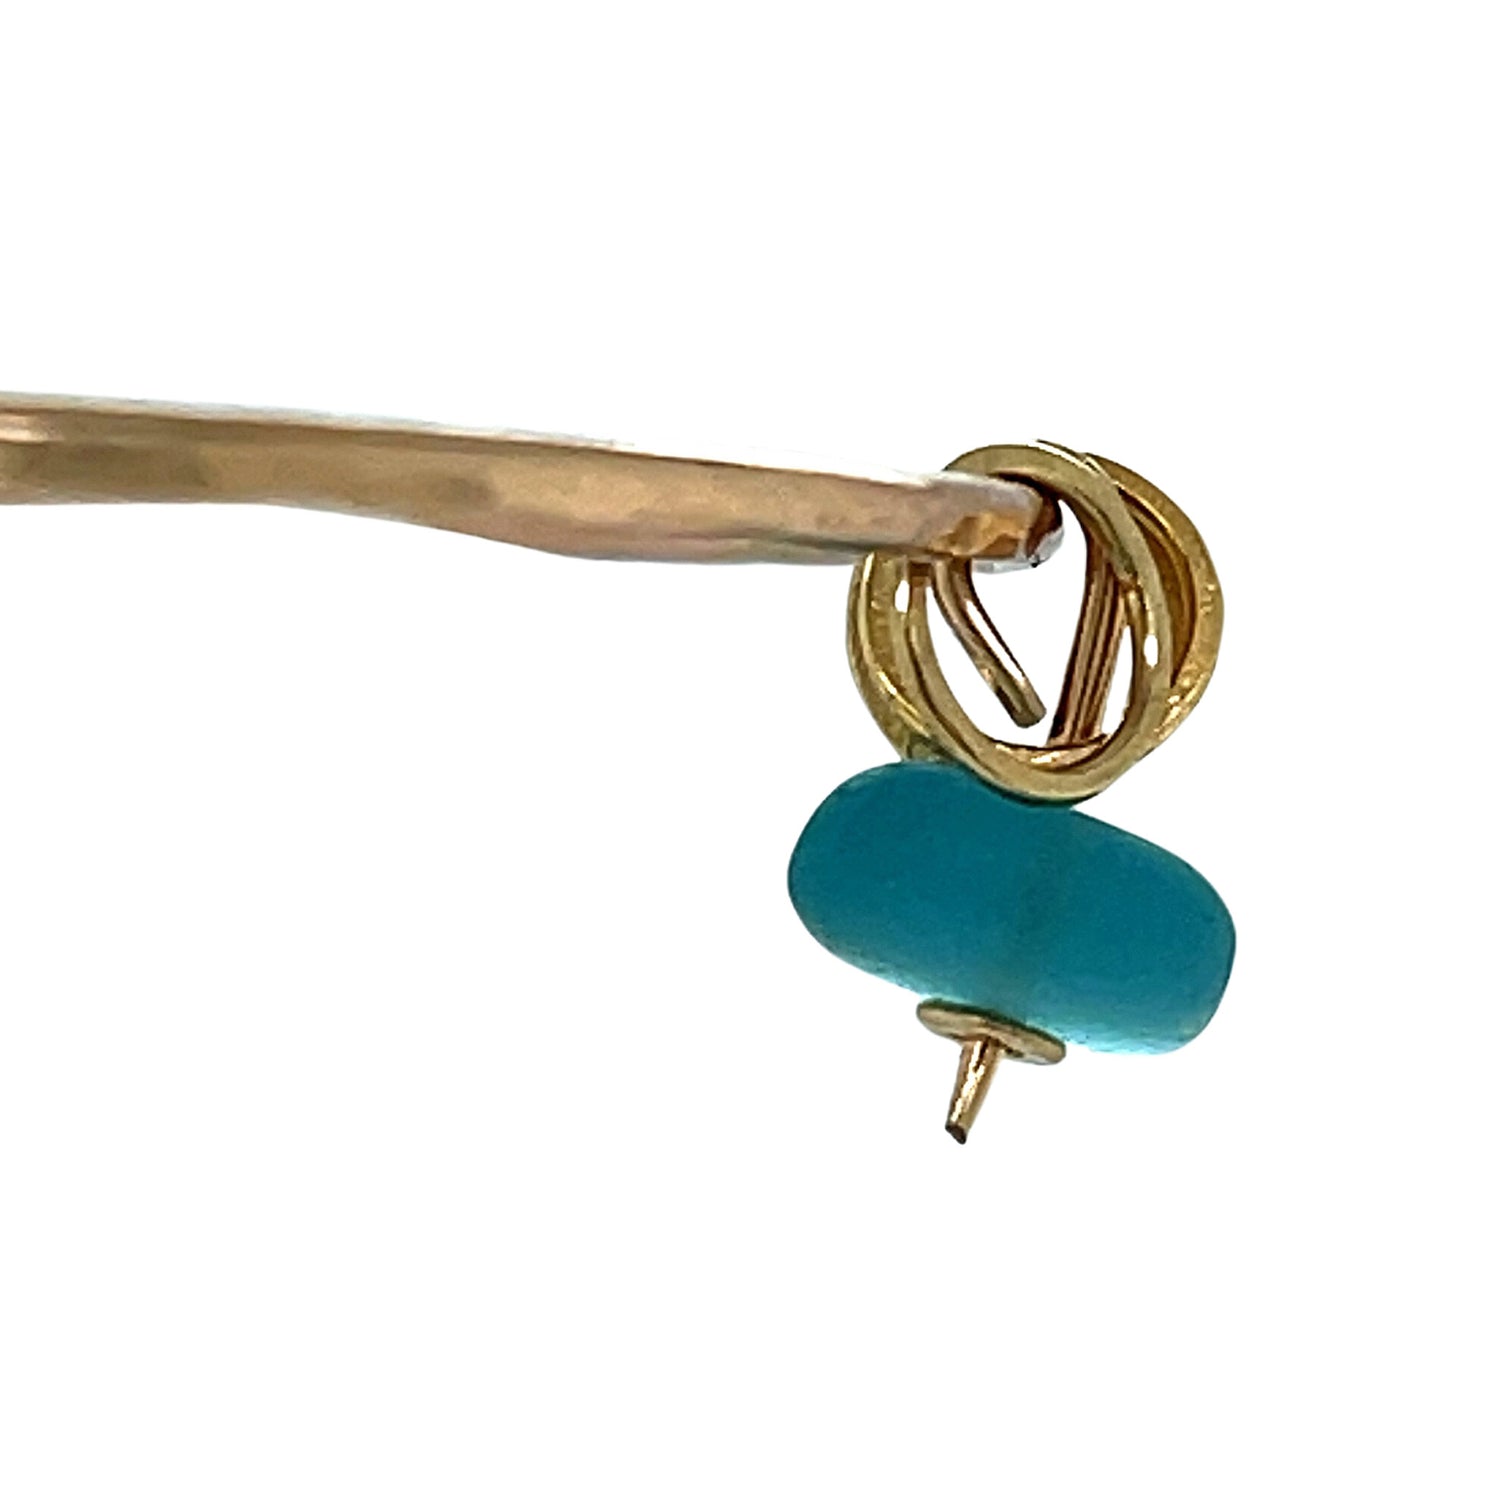 Bespoke Blue Sea Glass Bangle with Gold Circle Charms – Elegant Beach-inspired Jewellery for a Timeless Appeal